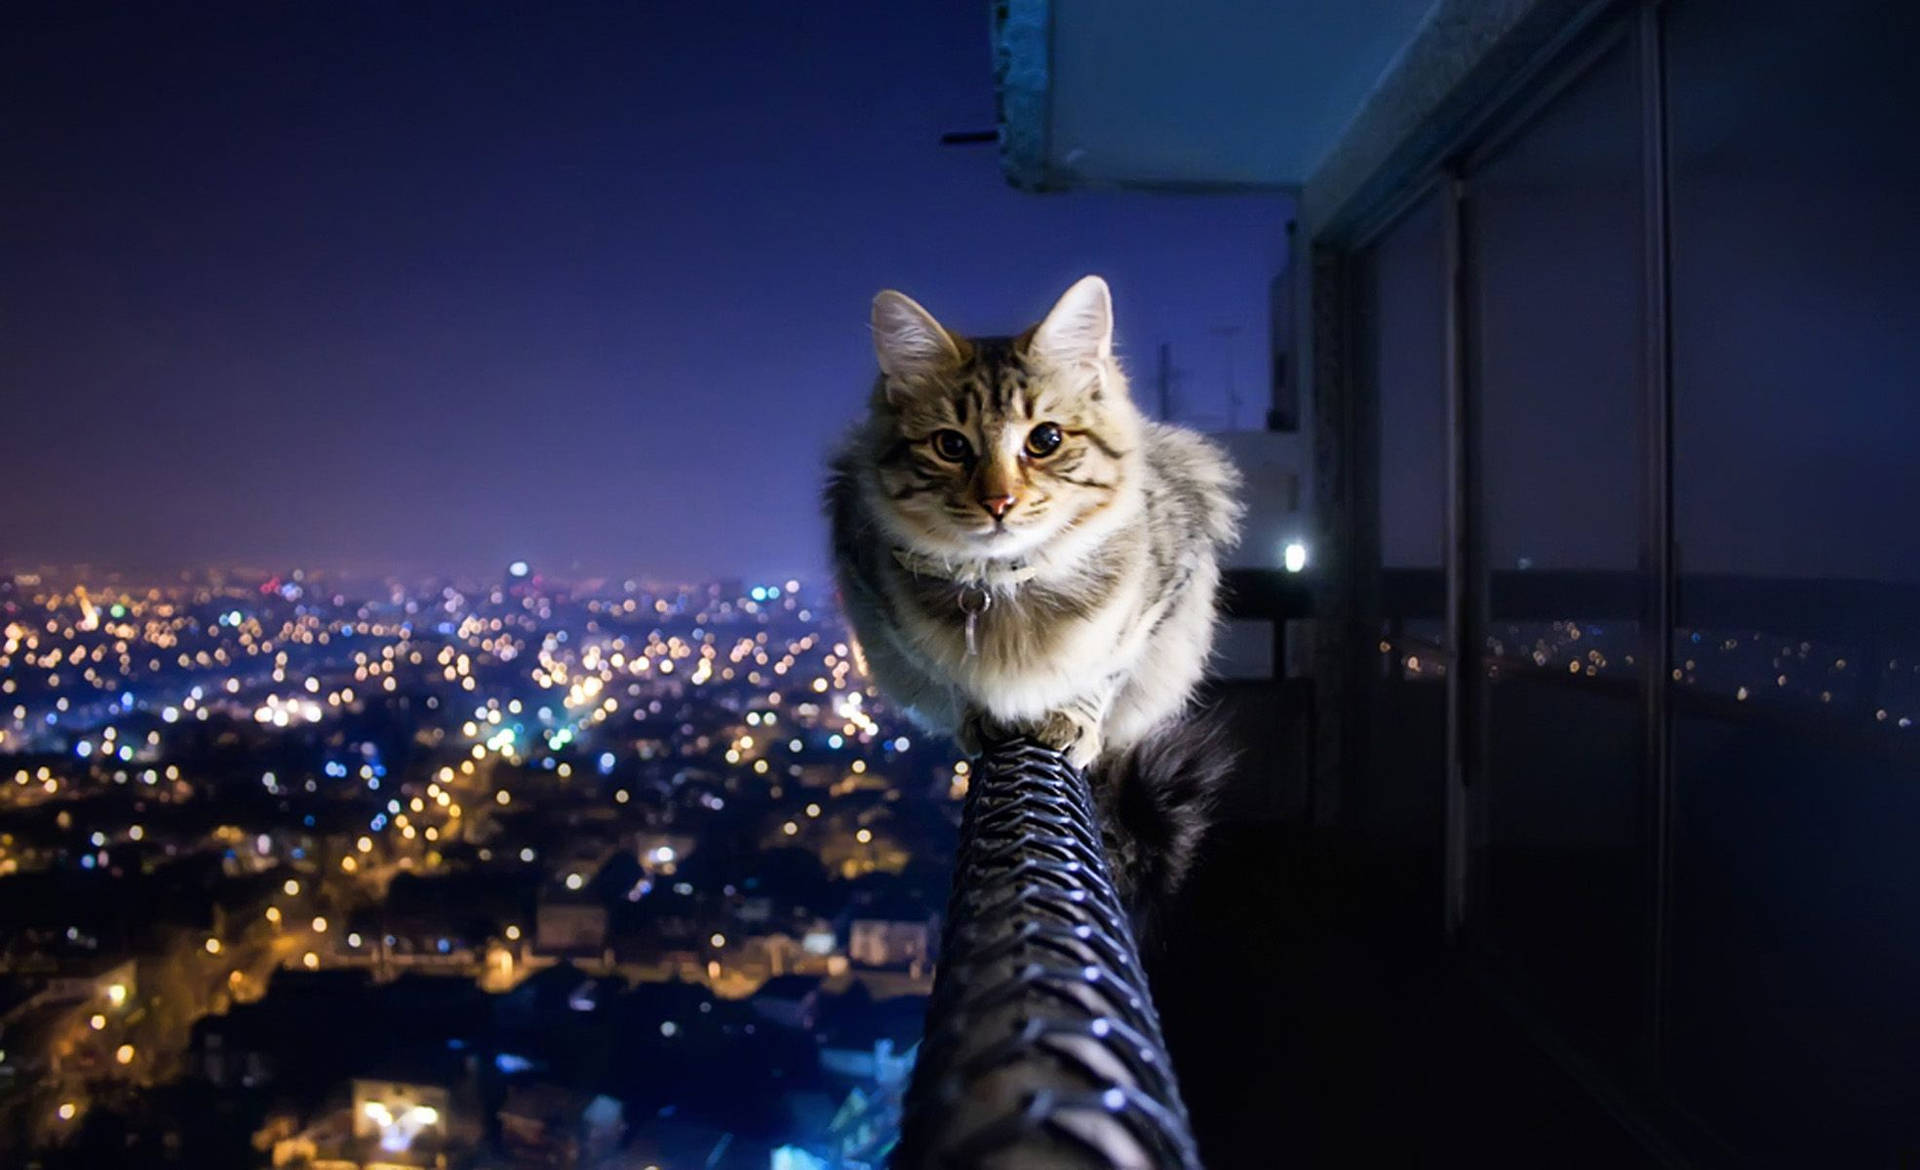 HD wallpaper of cat overlooking city view at night.  